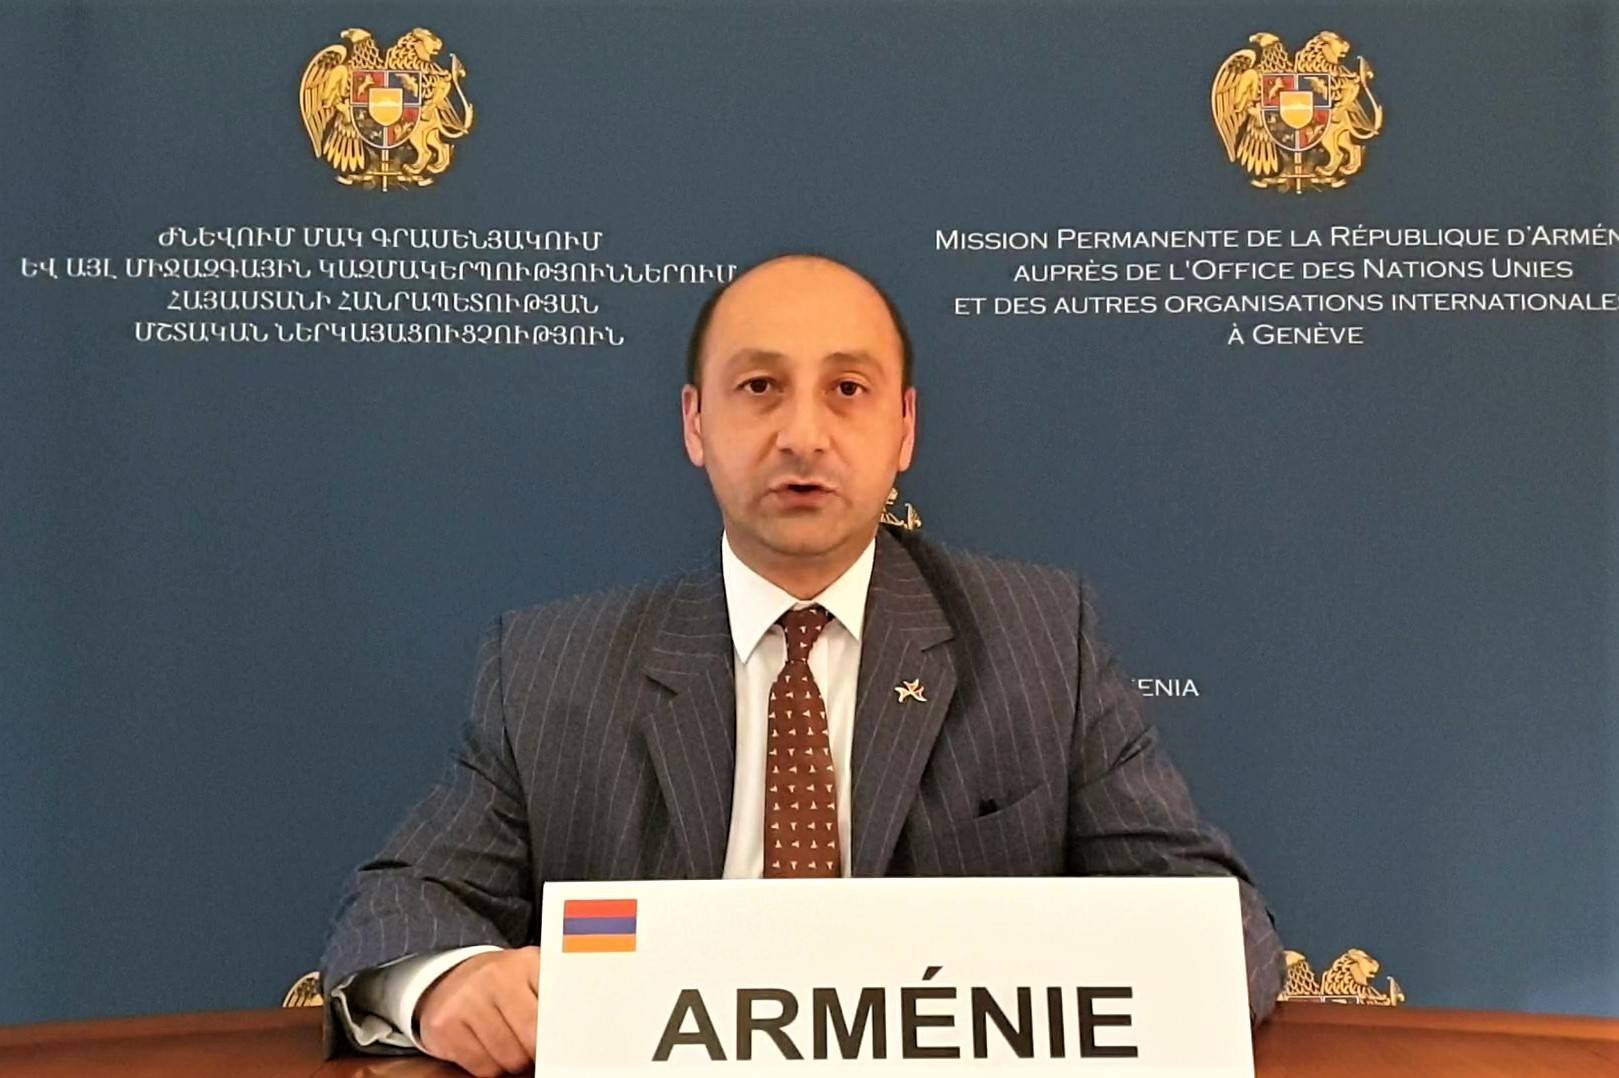 Statement of the Delegation of Armenia during the Interactive Dialogue with Special Rapporteur on human rights of internally displaced persons at the 47th Session of the UN Human Rights Council